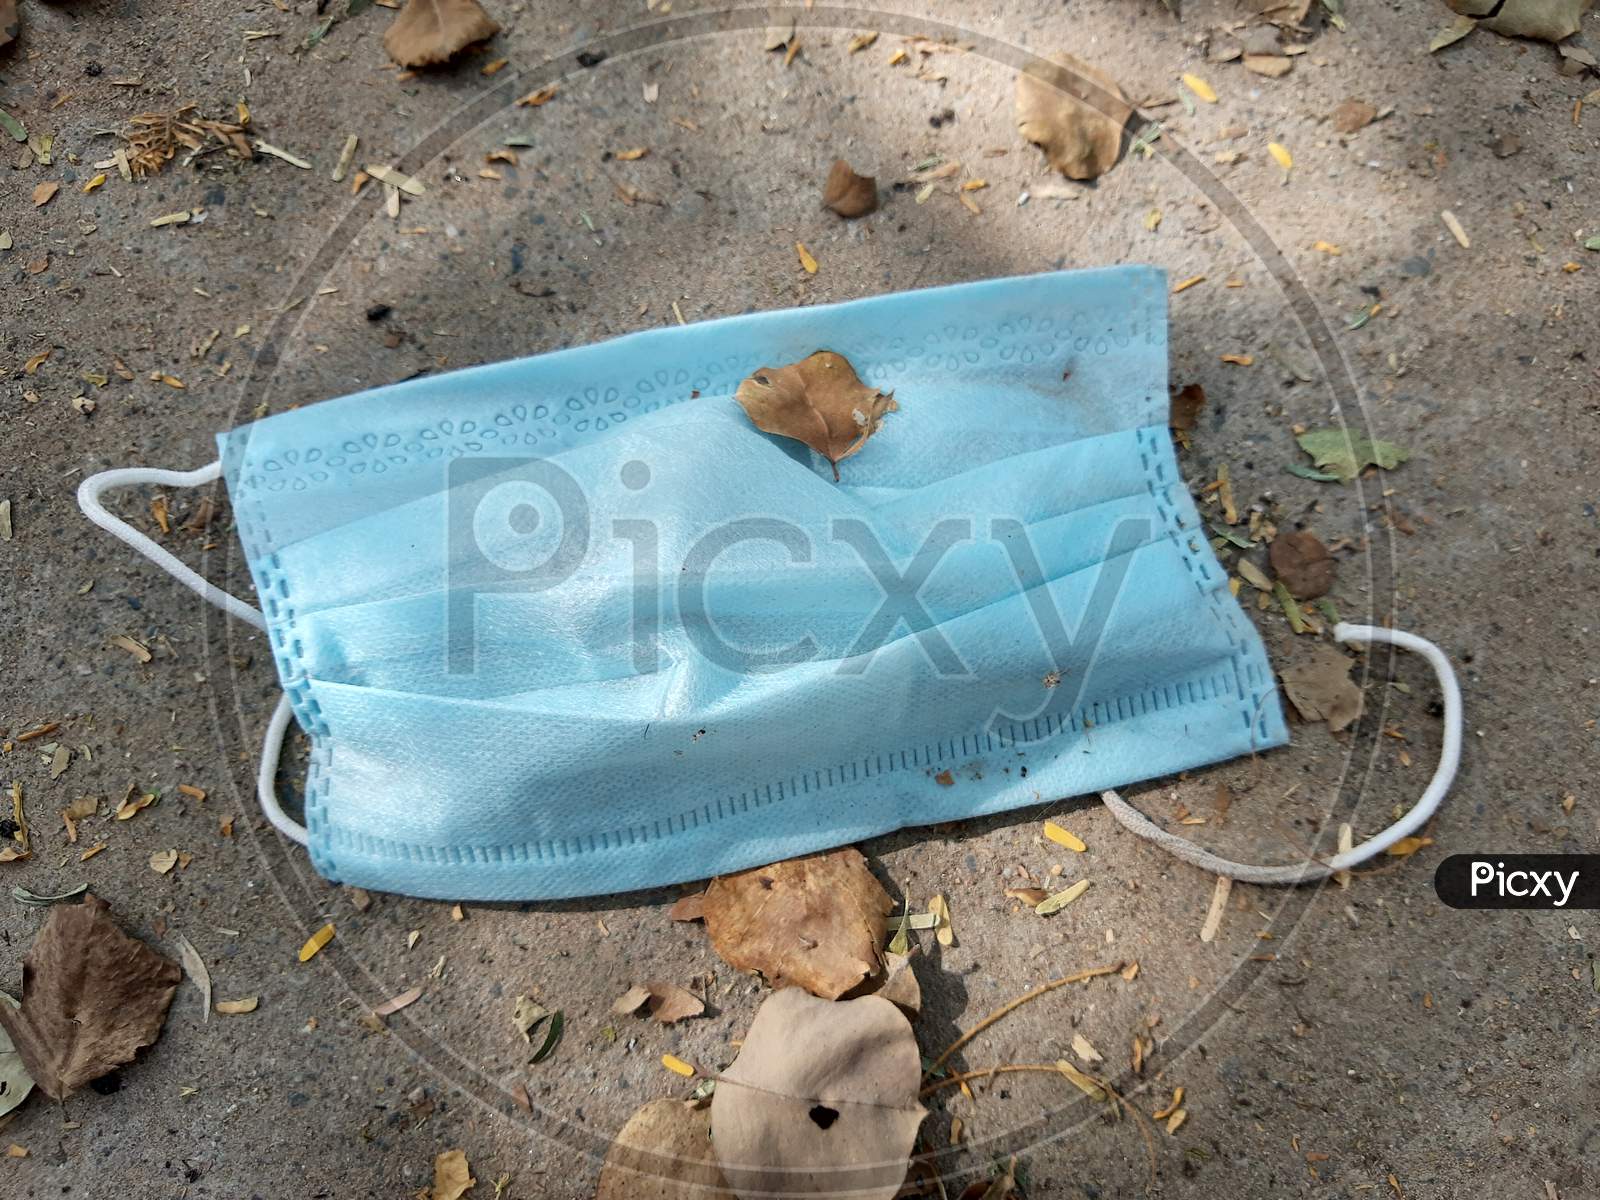 Used Disposable Medical Blue Face Mask Discarded On The Ground Of A City Road Lane. Environmental Pollution And Waste During The Covid-19 ( Coronavirus ) Pandemic.